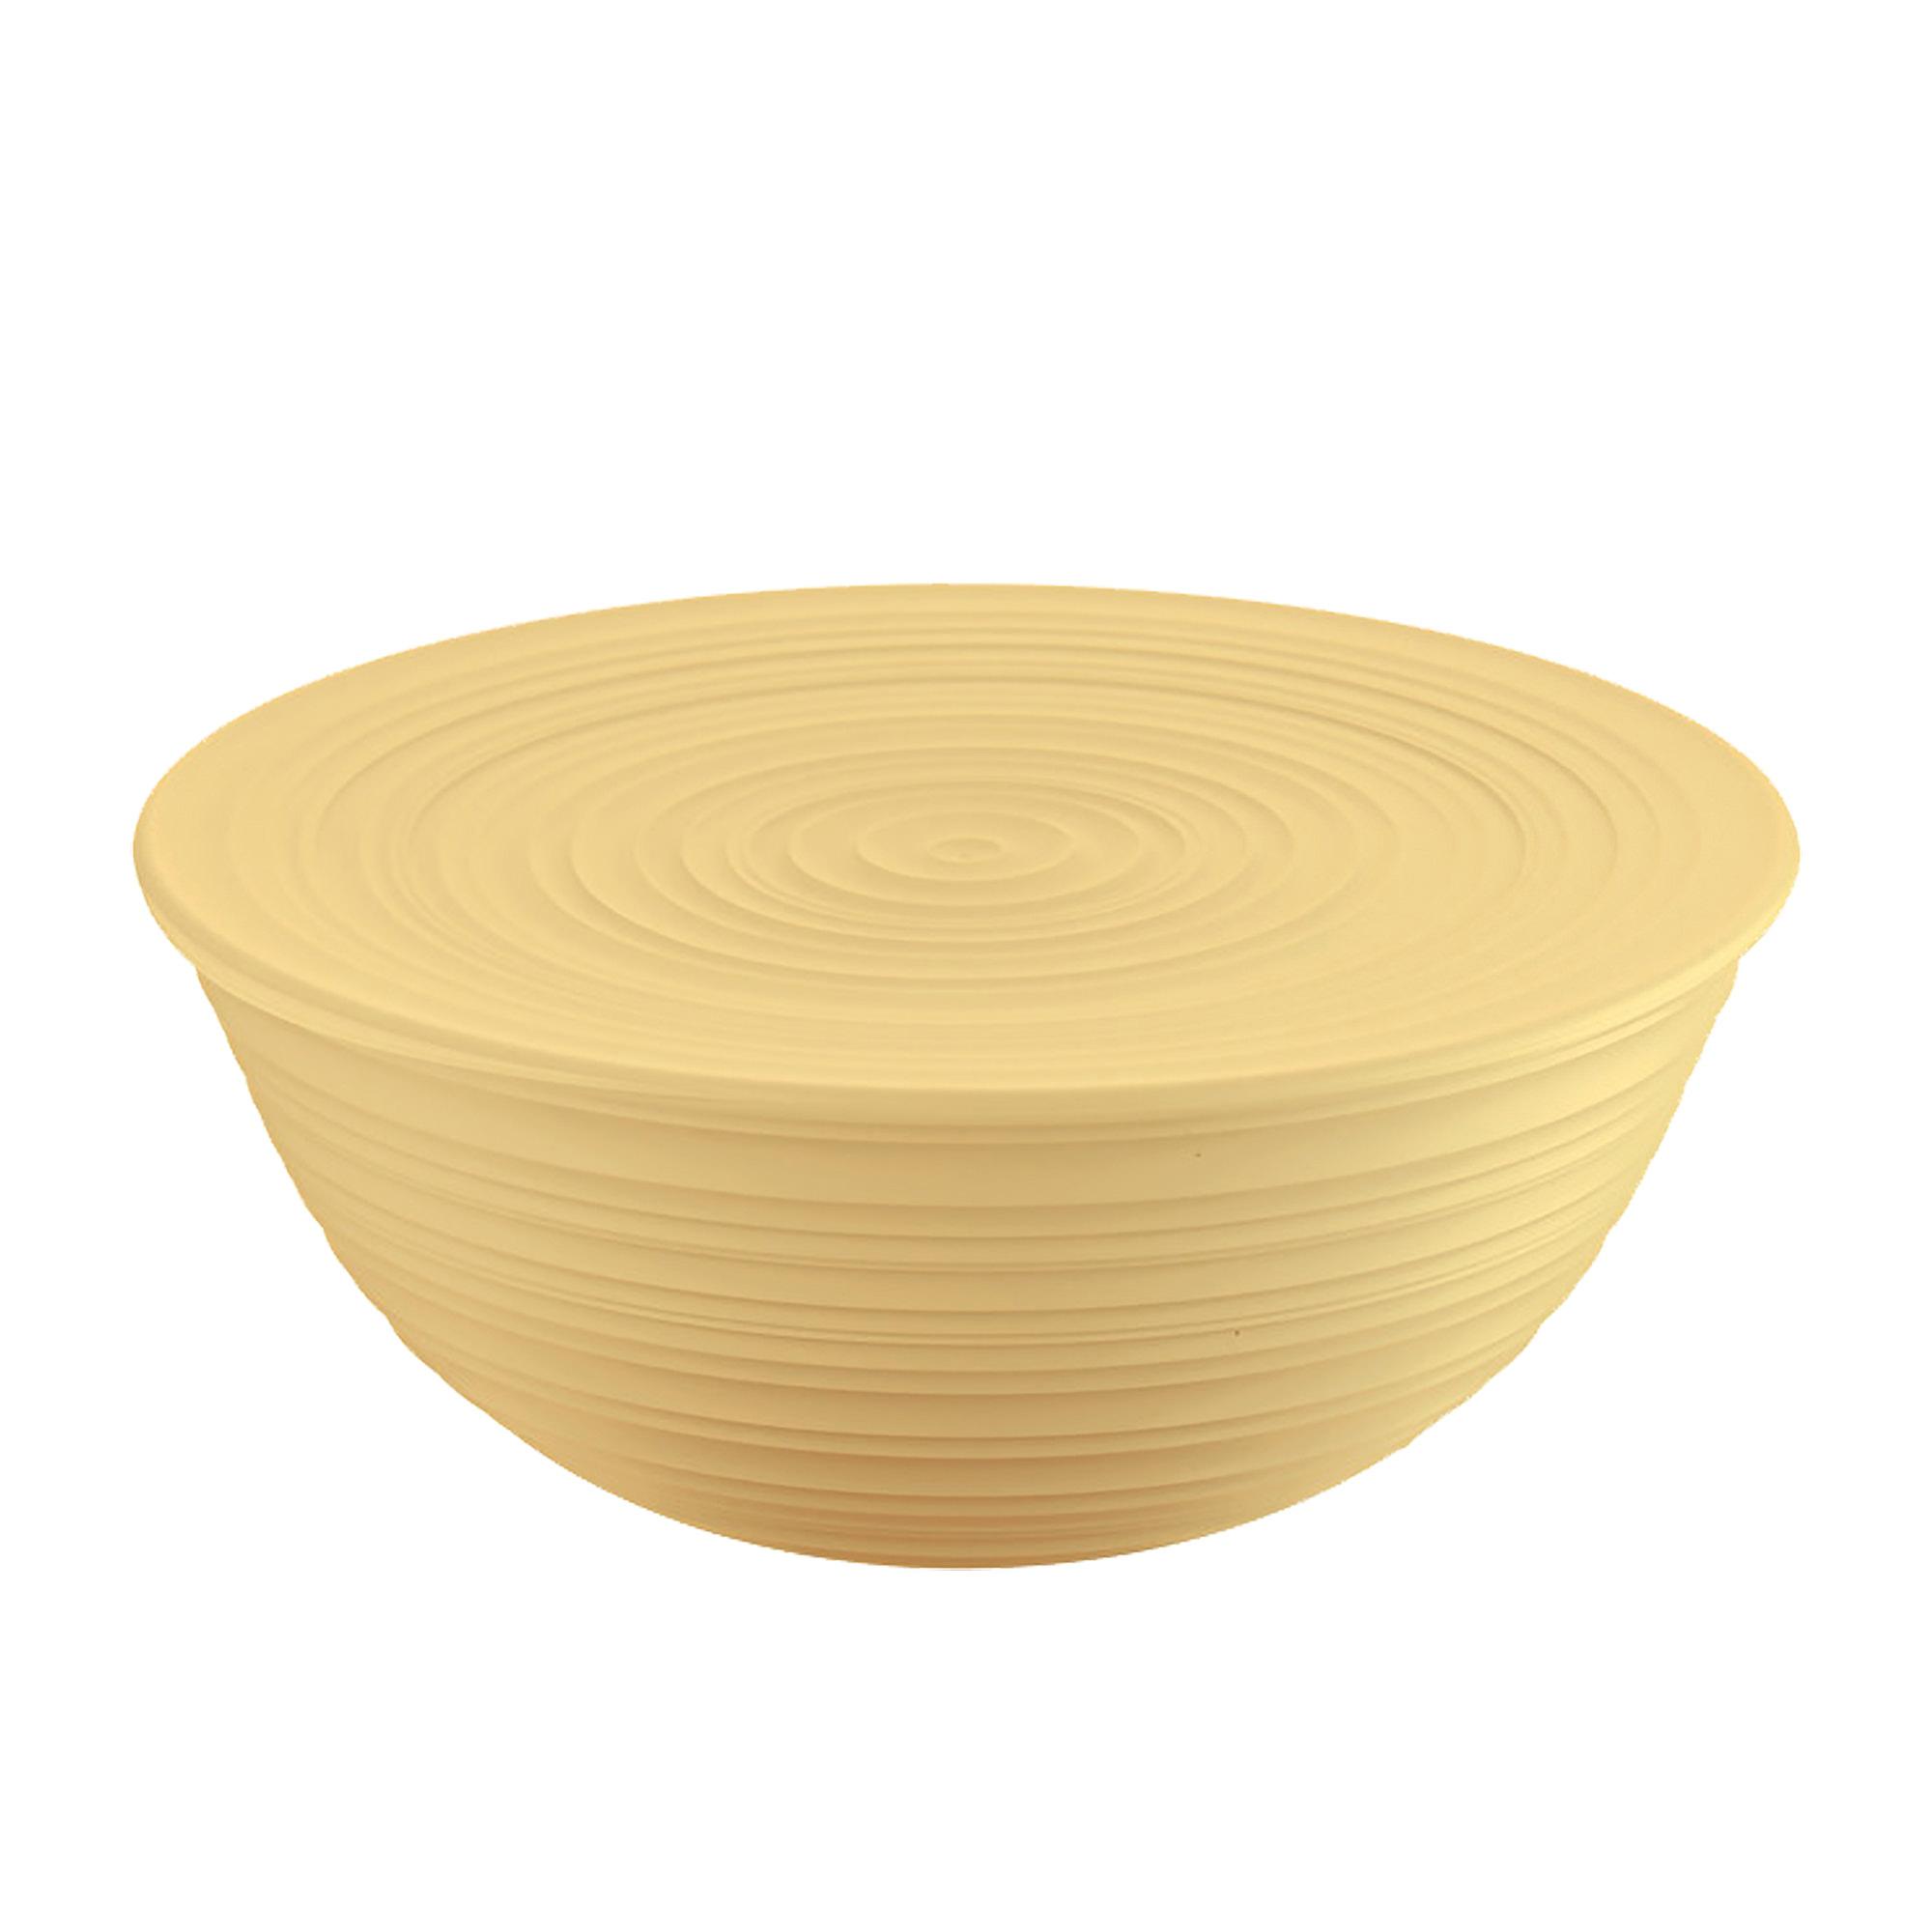 Guzzini Earth Tierra Bowl with Lid Extra Large Mustard Yellow Image 1